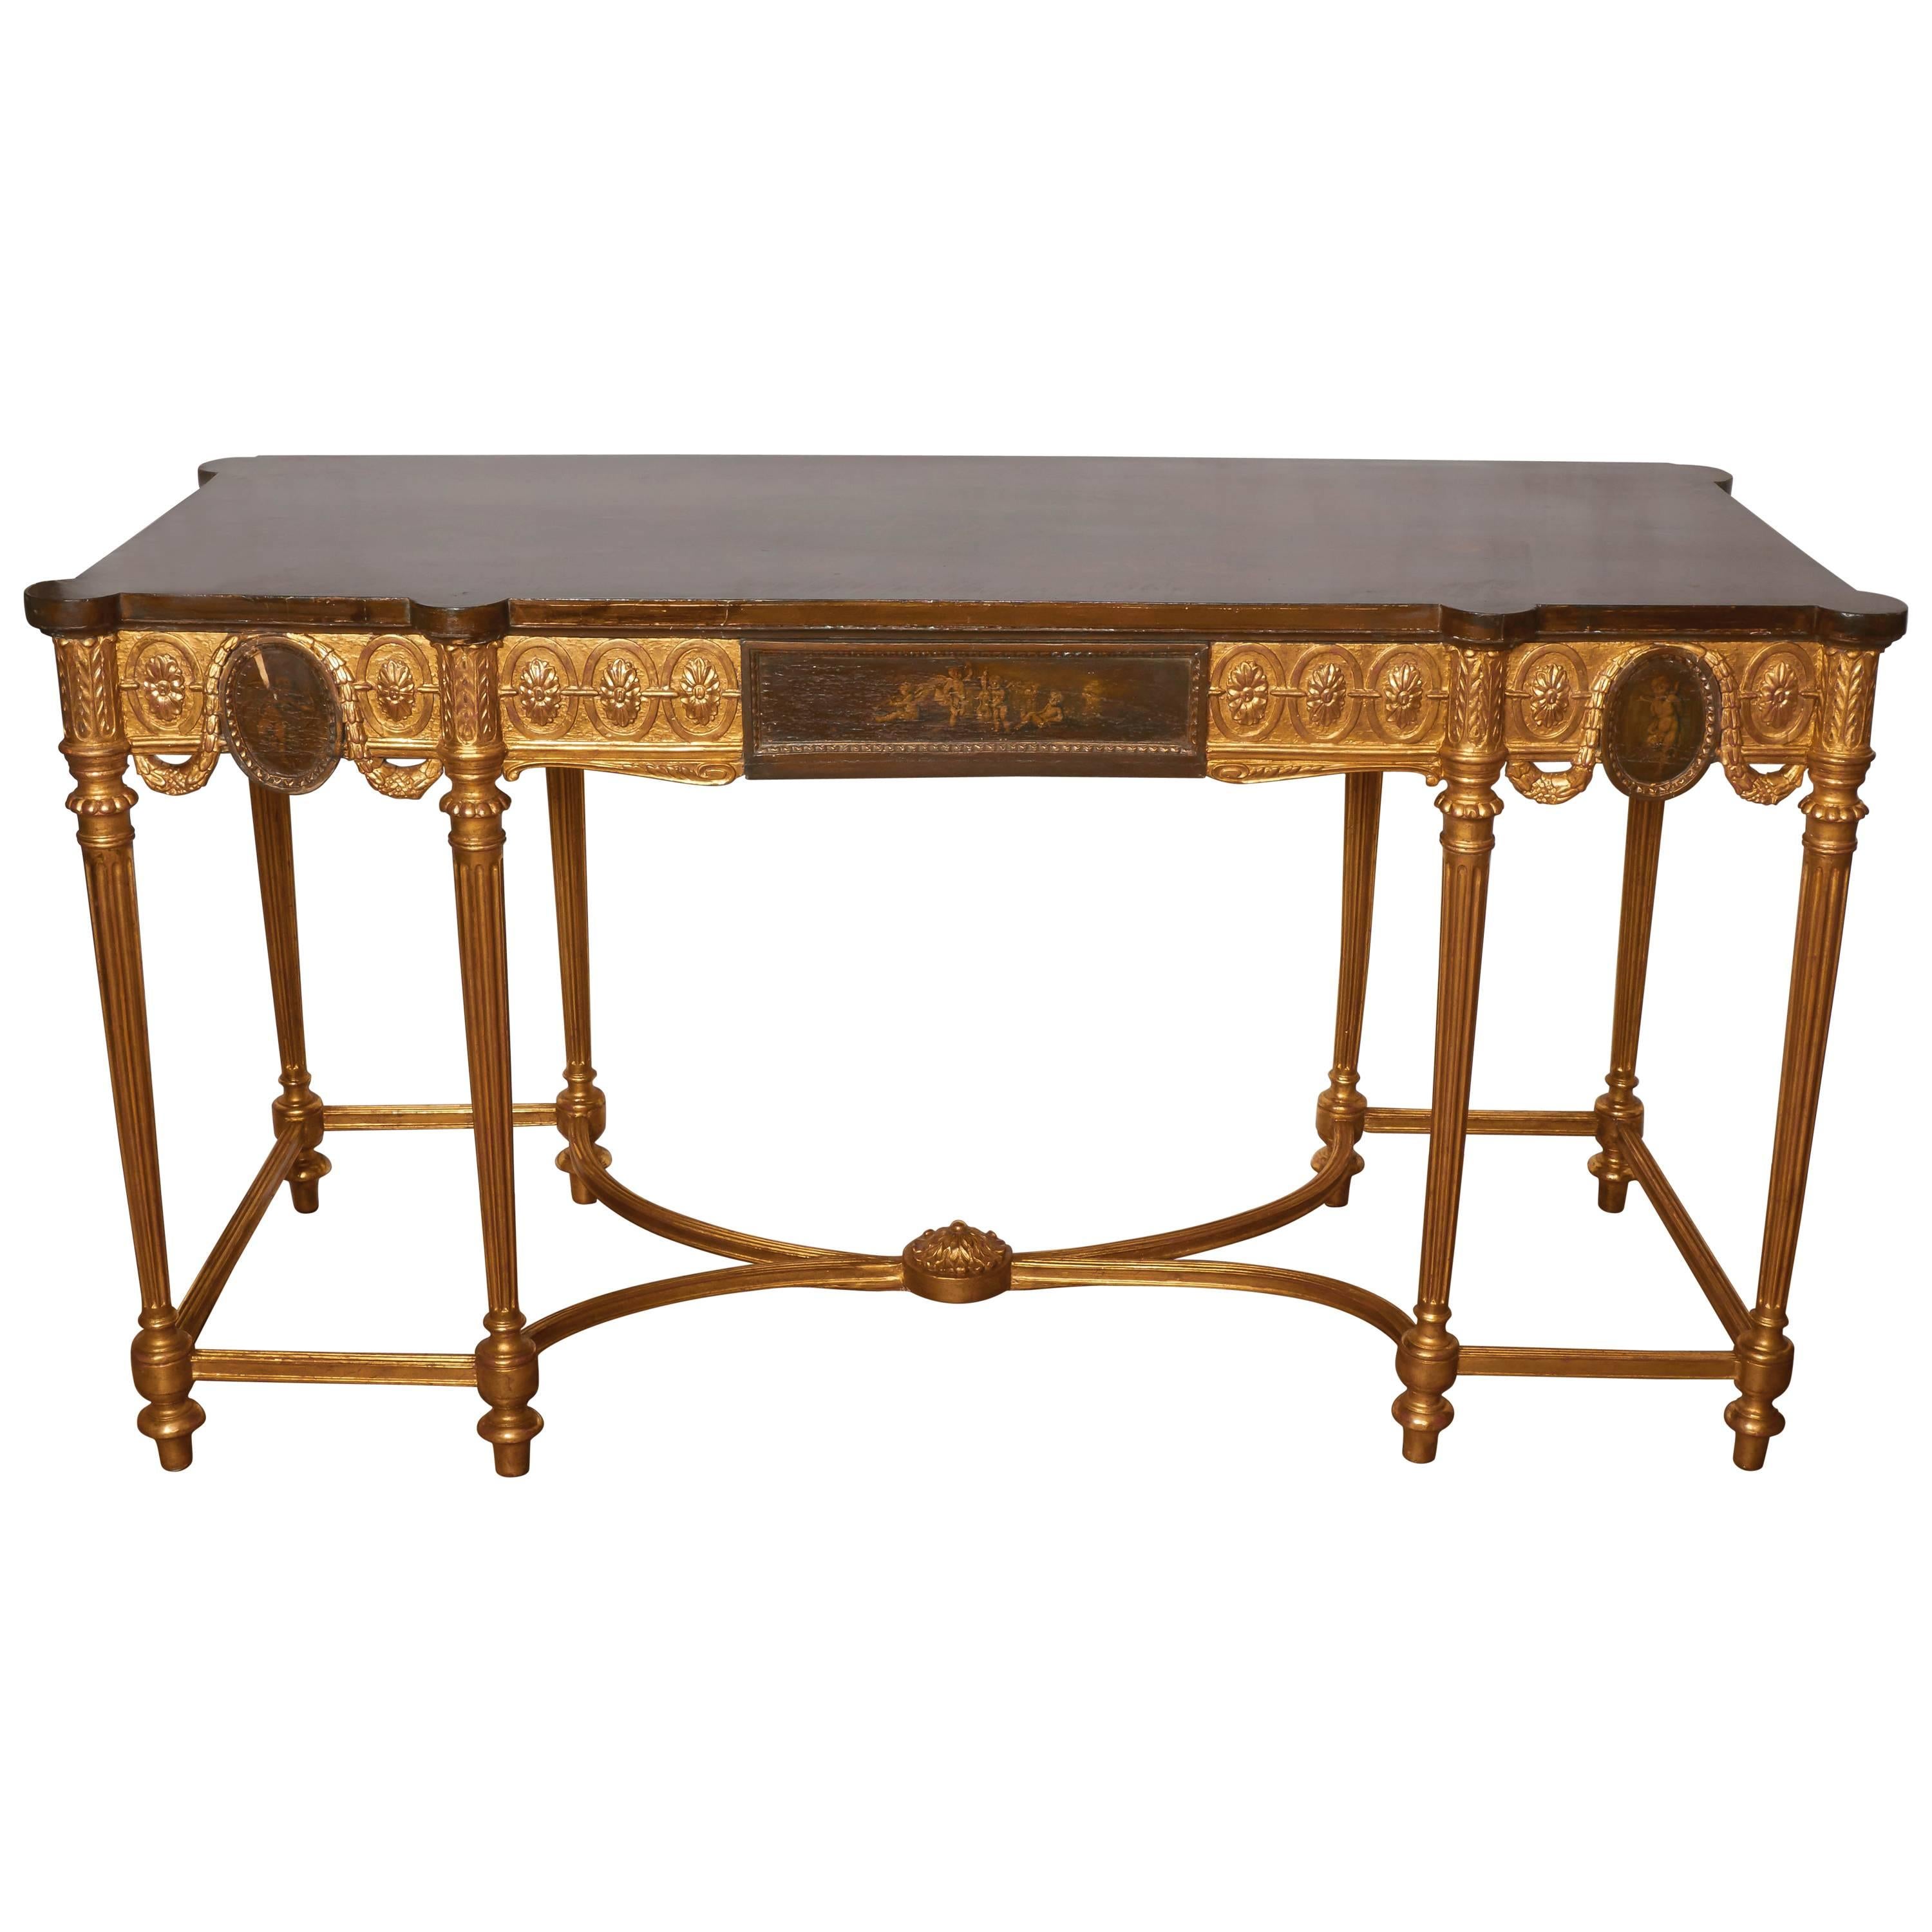 English Neoclassical Style Satinwood and Giltwood Console Table